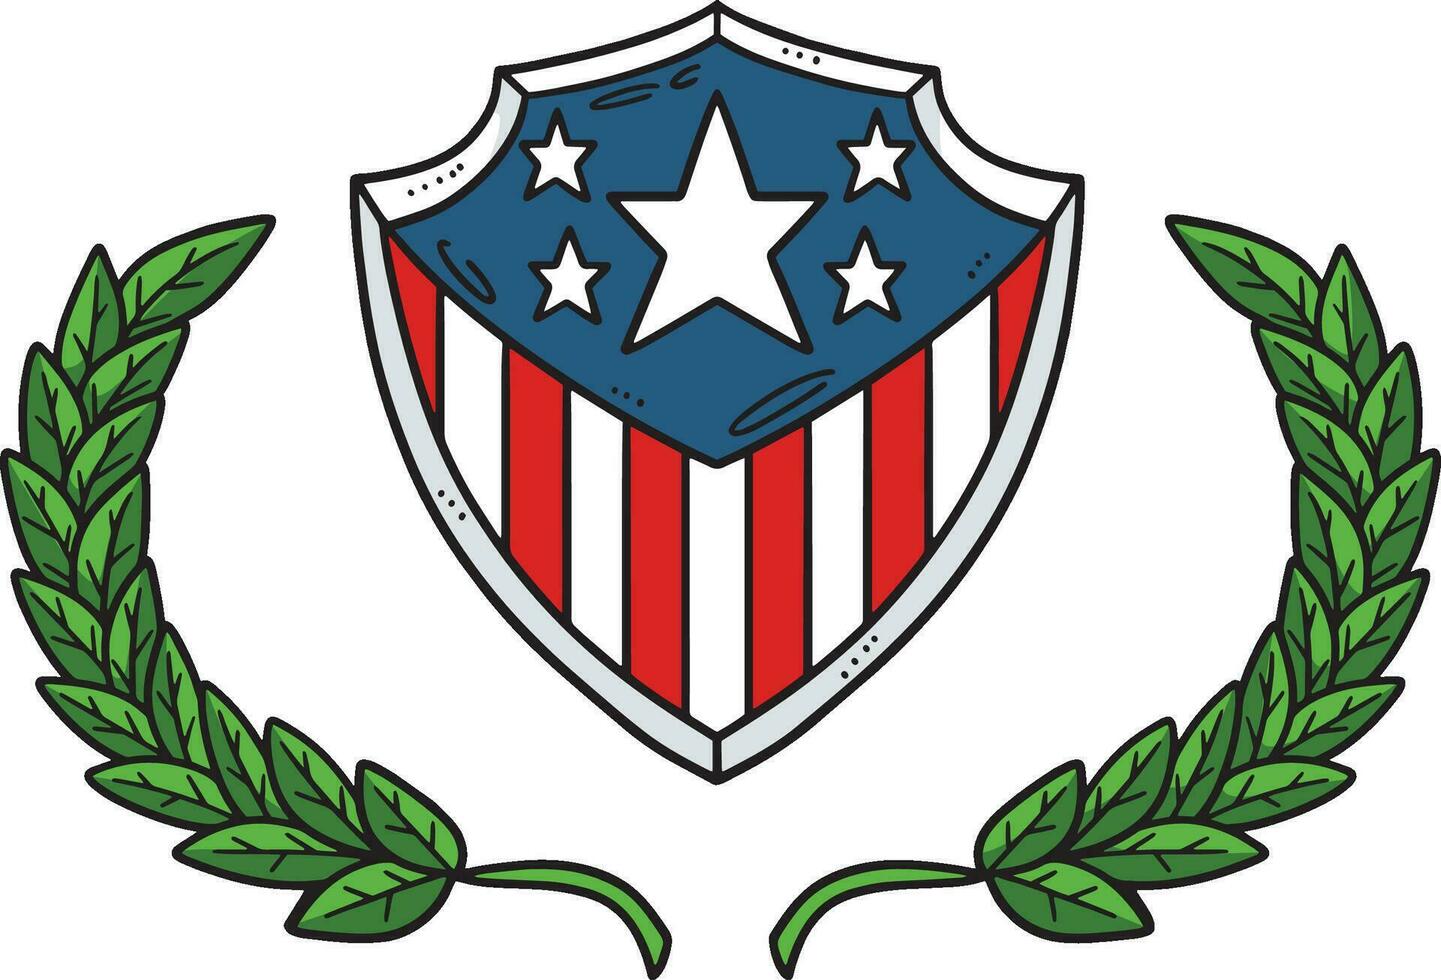 Shield Star Stripes and Laurel Wreath Clipart vector